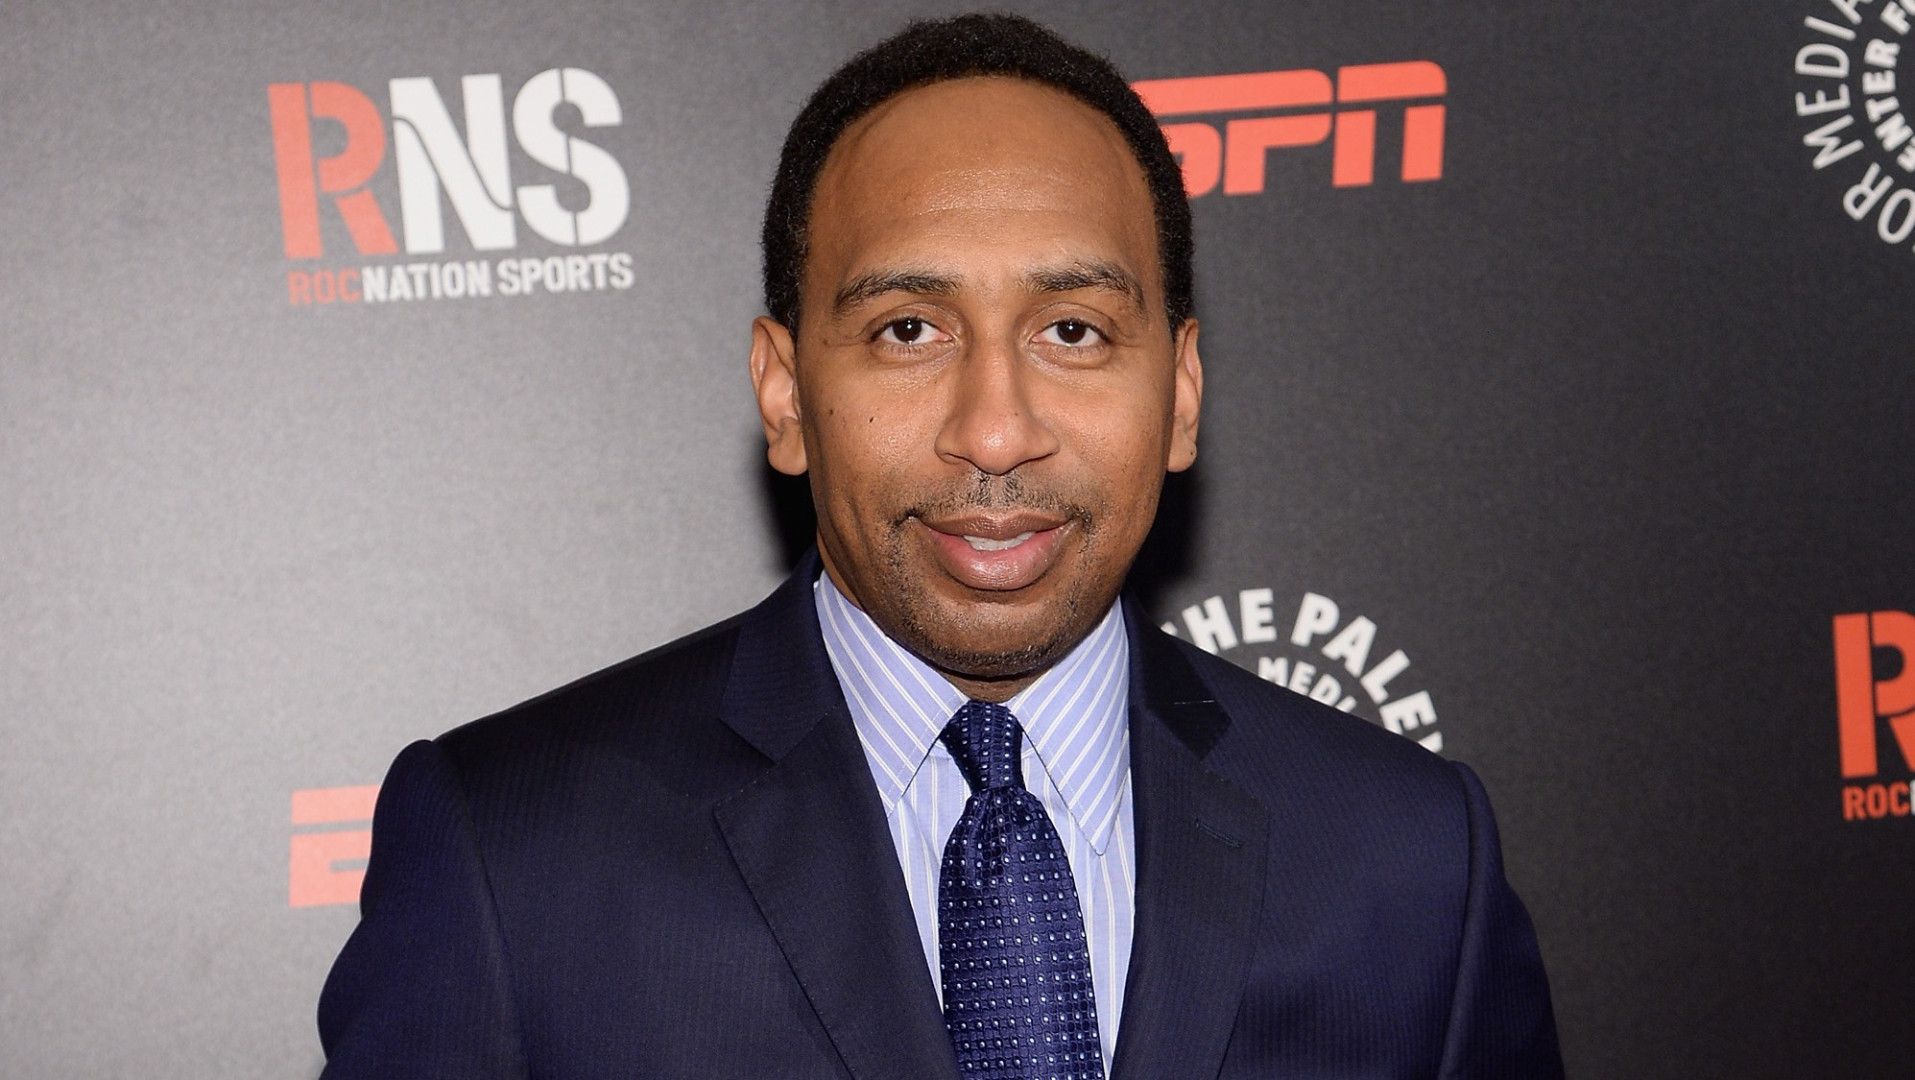 Rumor: Stephen A. Smith is coming to ESPN’s NBA broadcasts